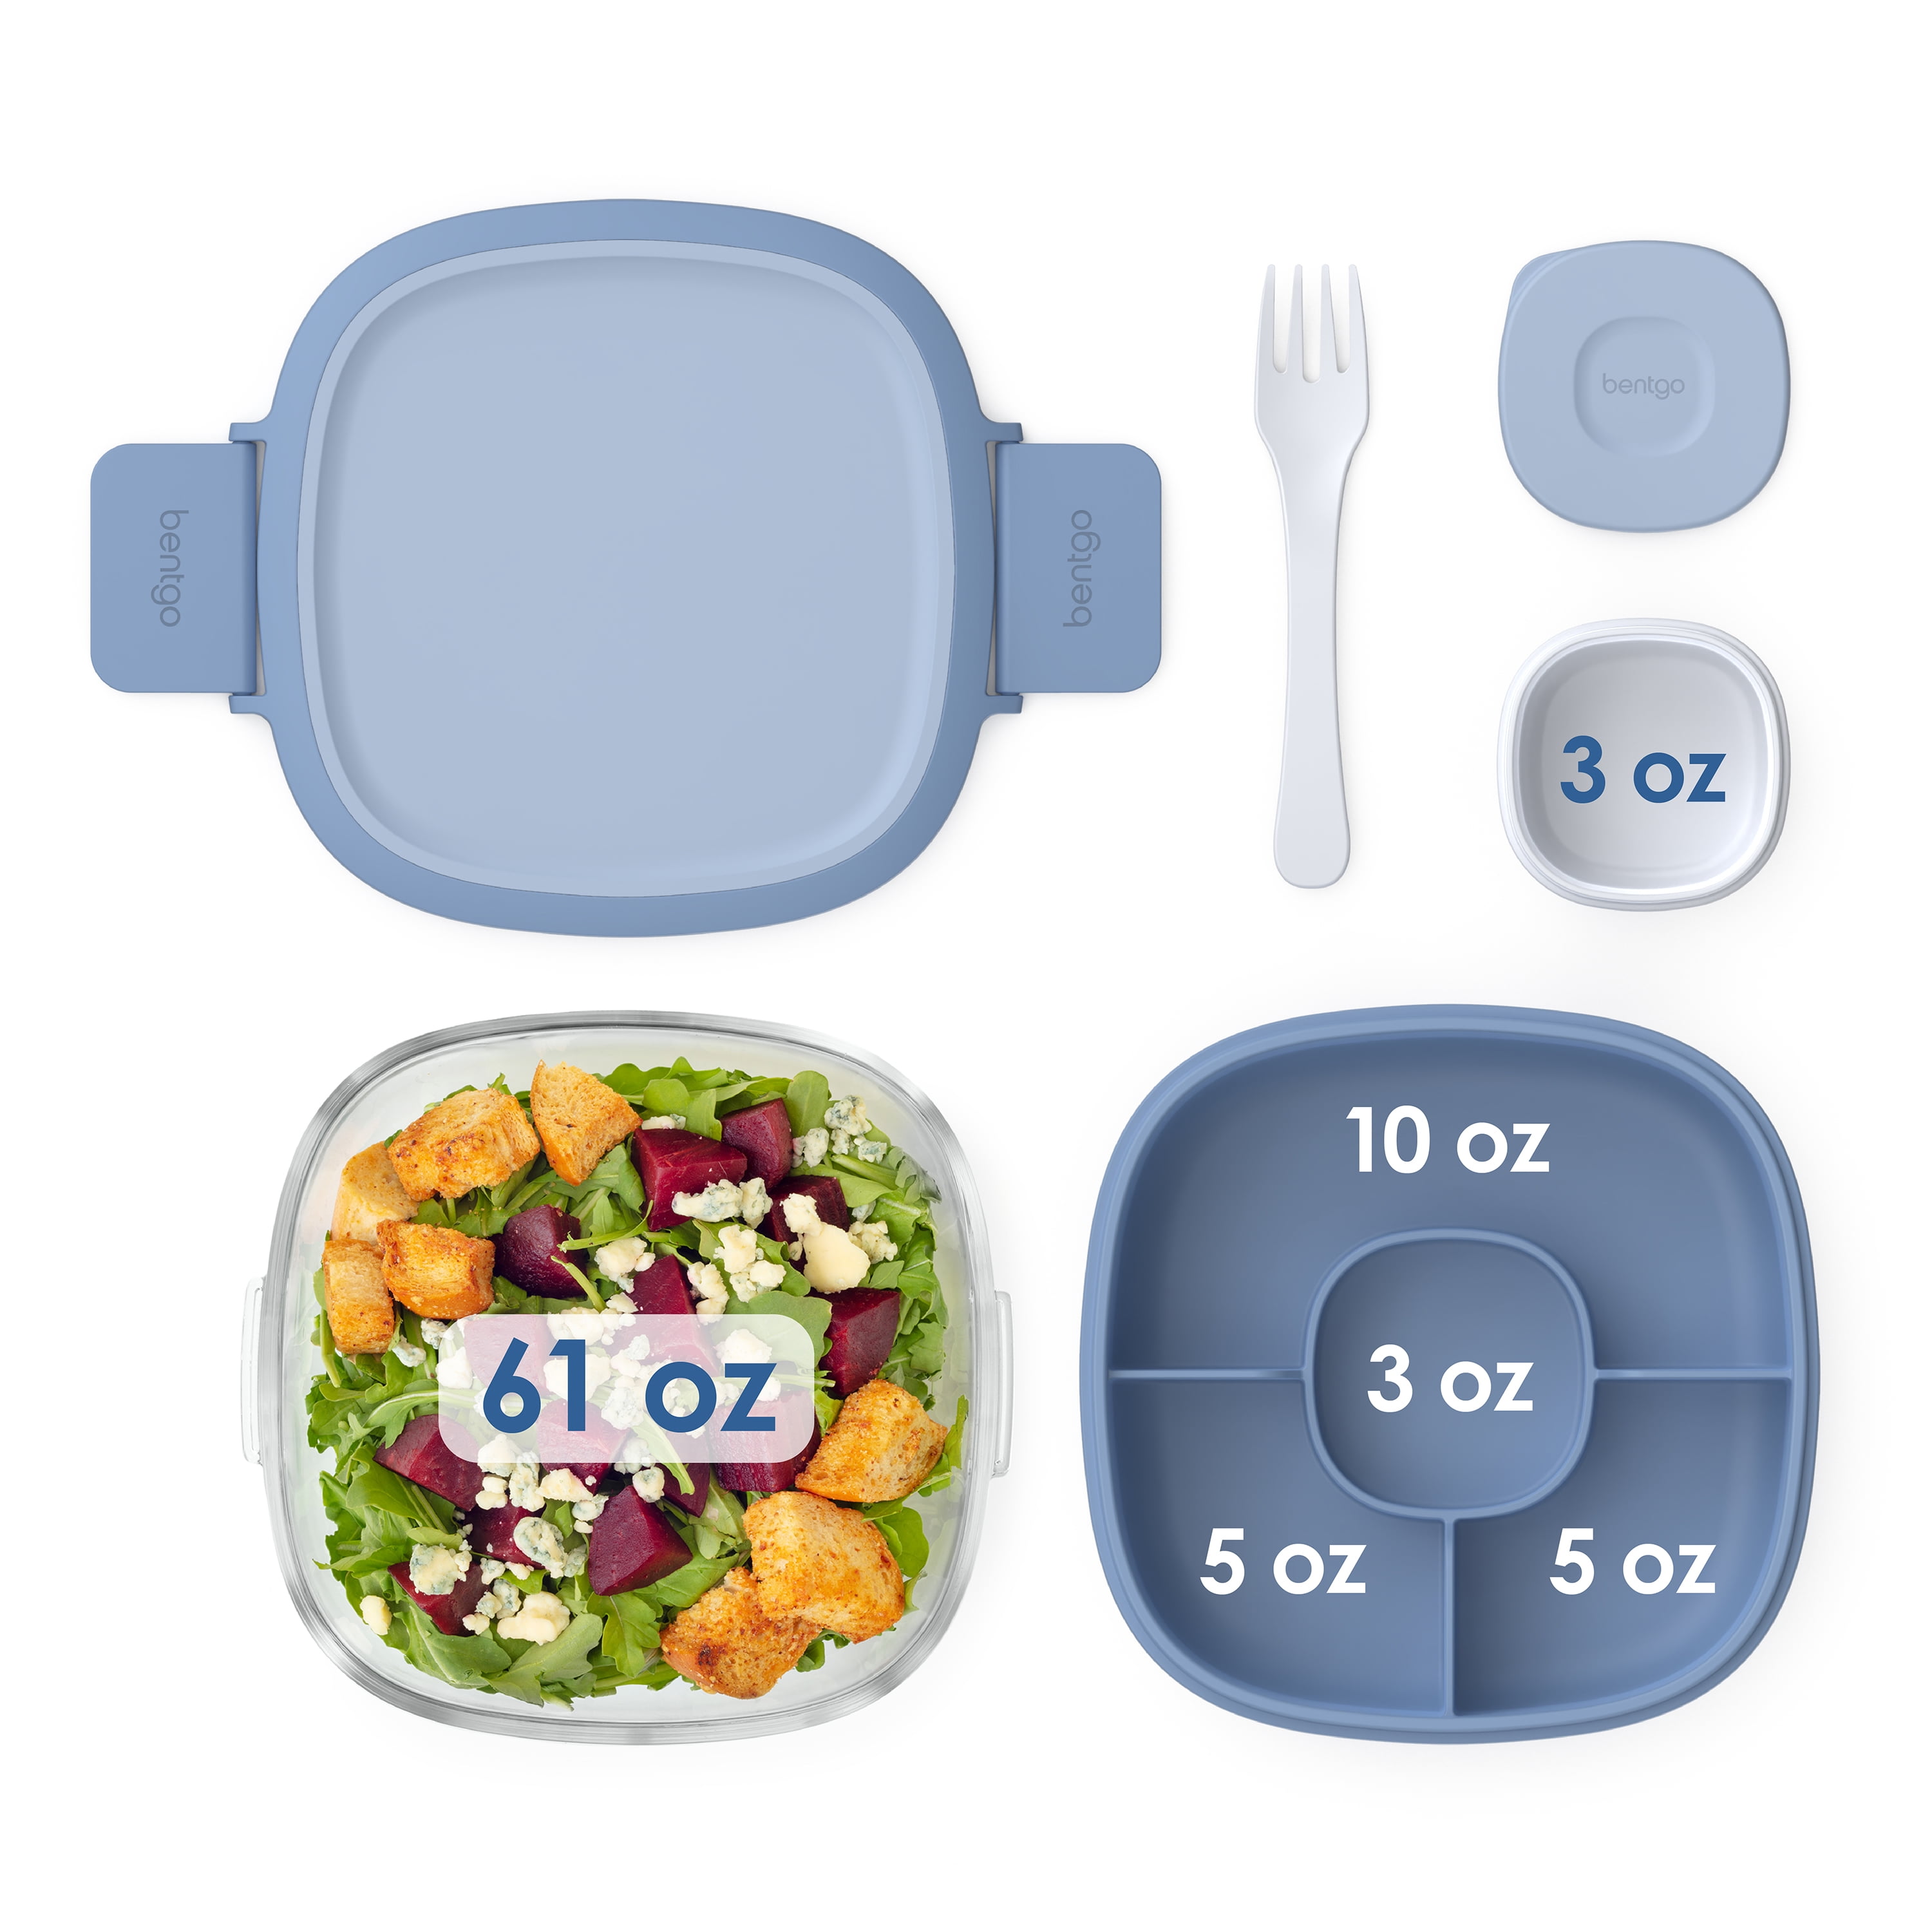  Bentgo® All-in-One Salad Container - Large Salad Bowl, Bento  Box Tray, Leak-Proof Sauce Container, Airtight Lid, & Fork for Healthy  Adult Lunches; BPA-Free & Dishwasher/Microwave Safe (Blush Marble): Home &  Kitchen